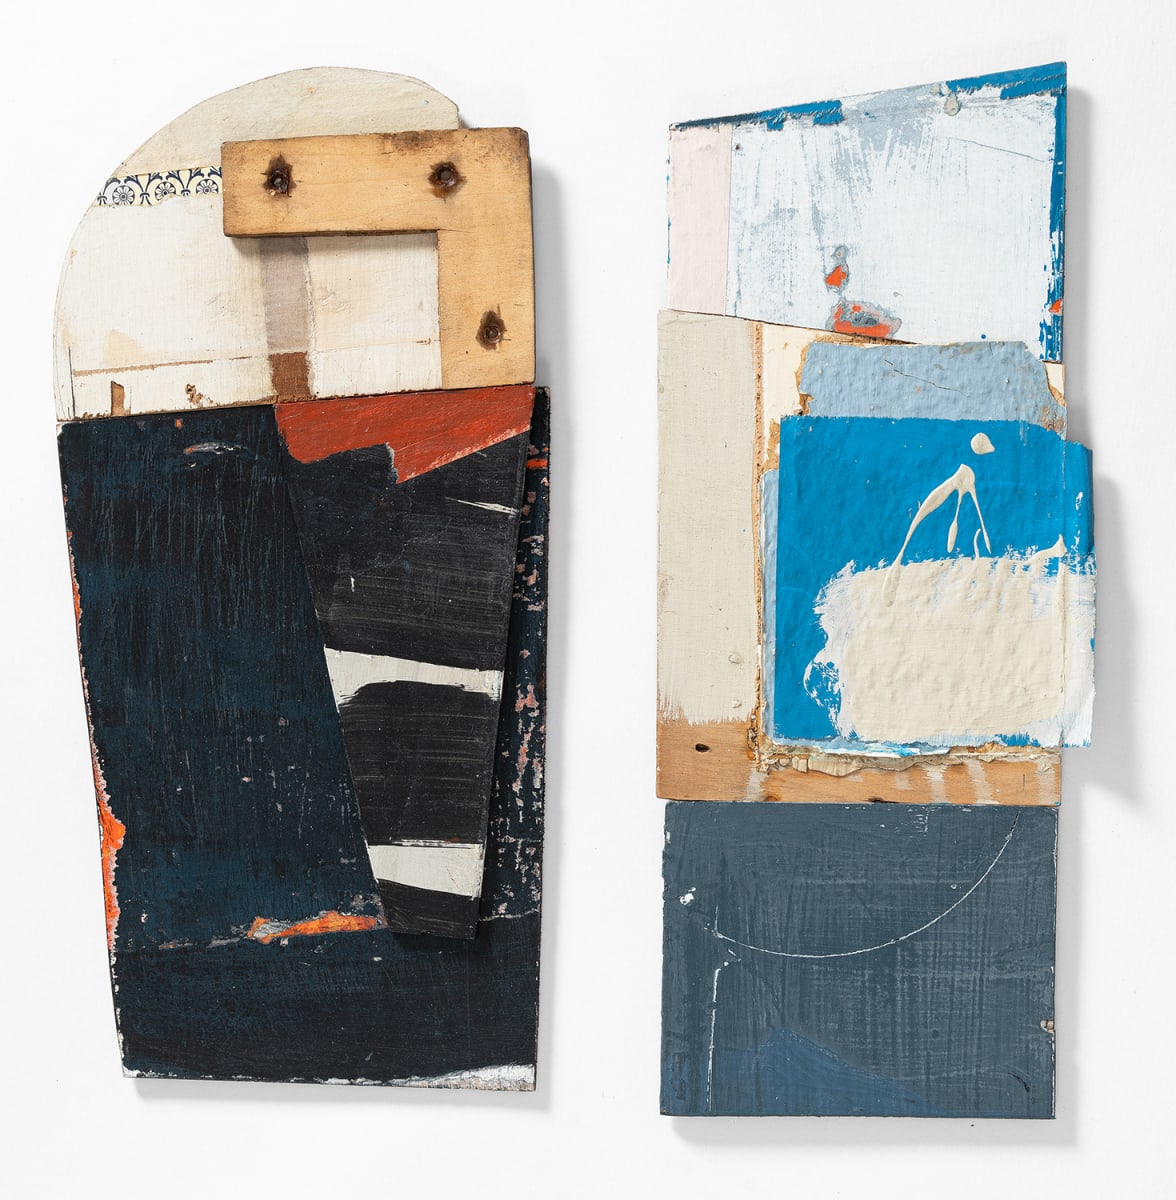 Rest and Repair (diptych) by Karen Stamper 